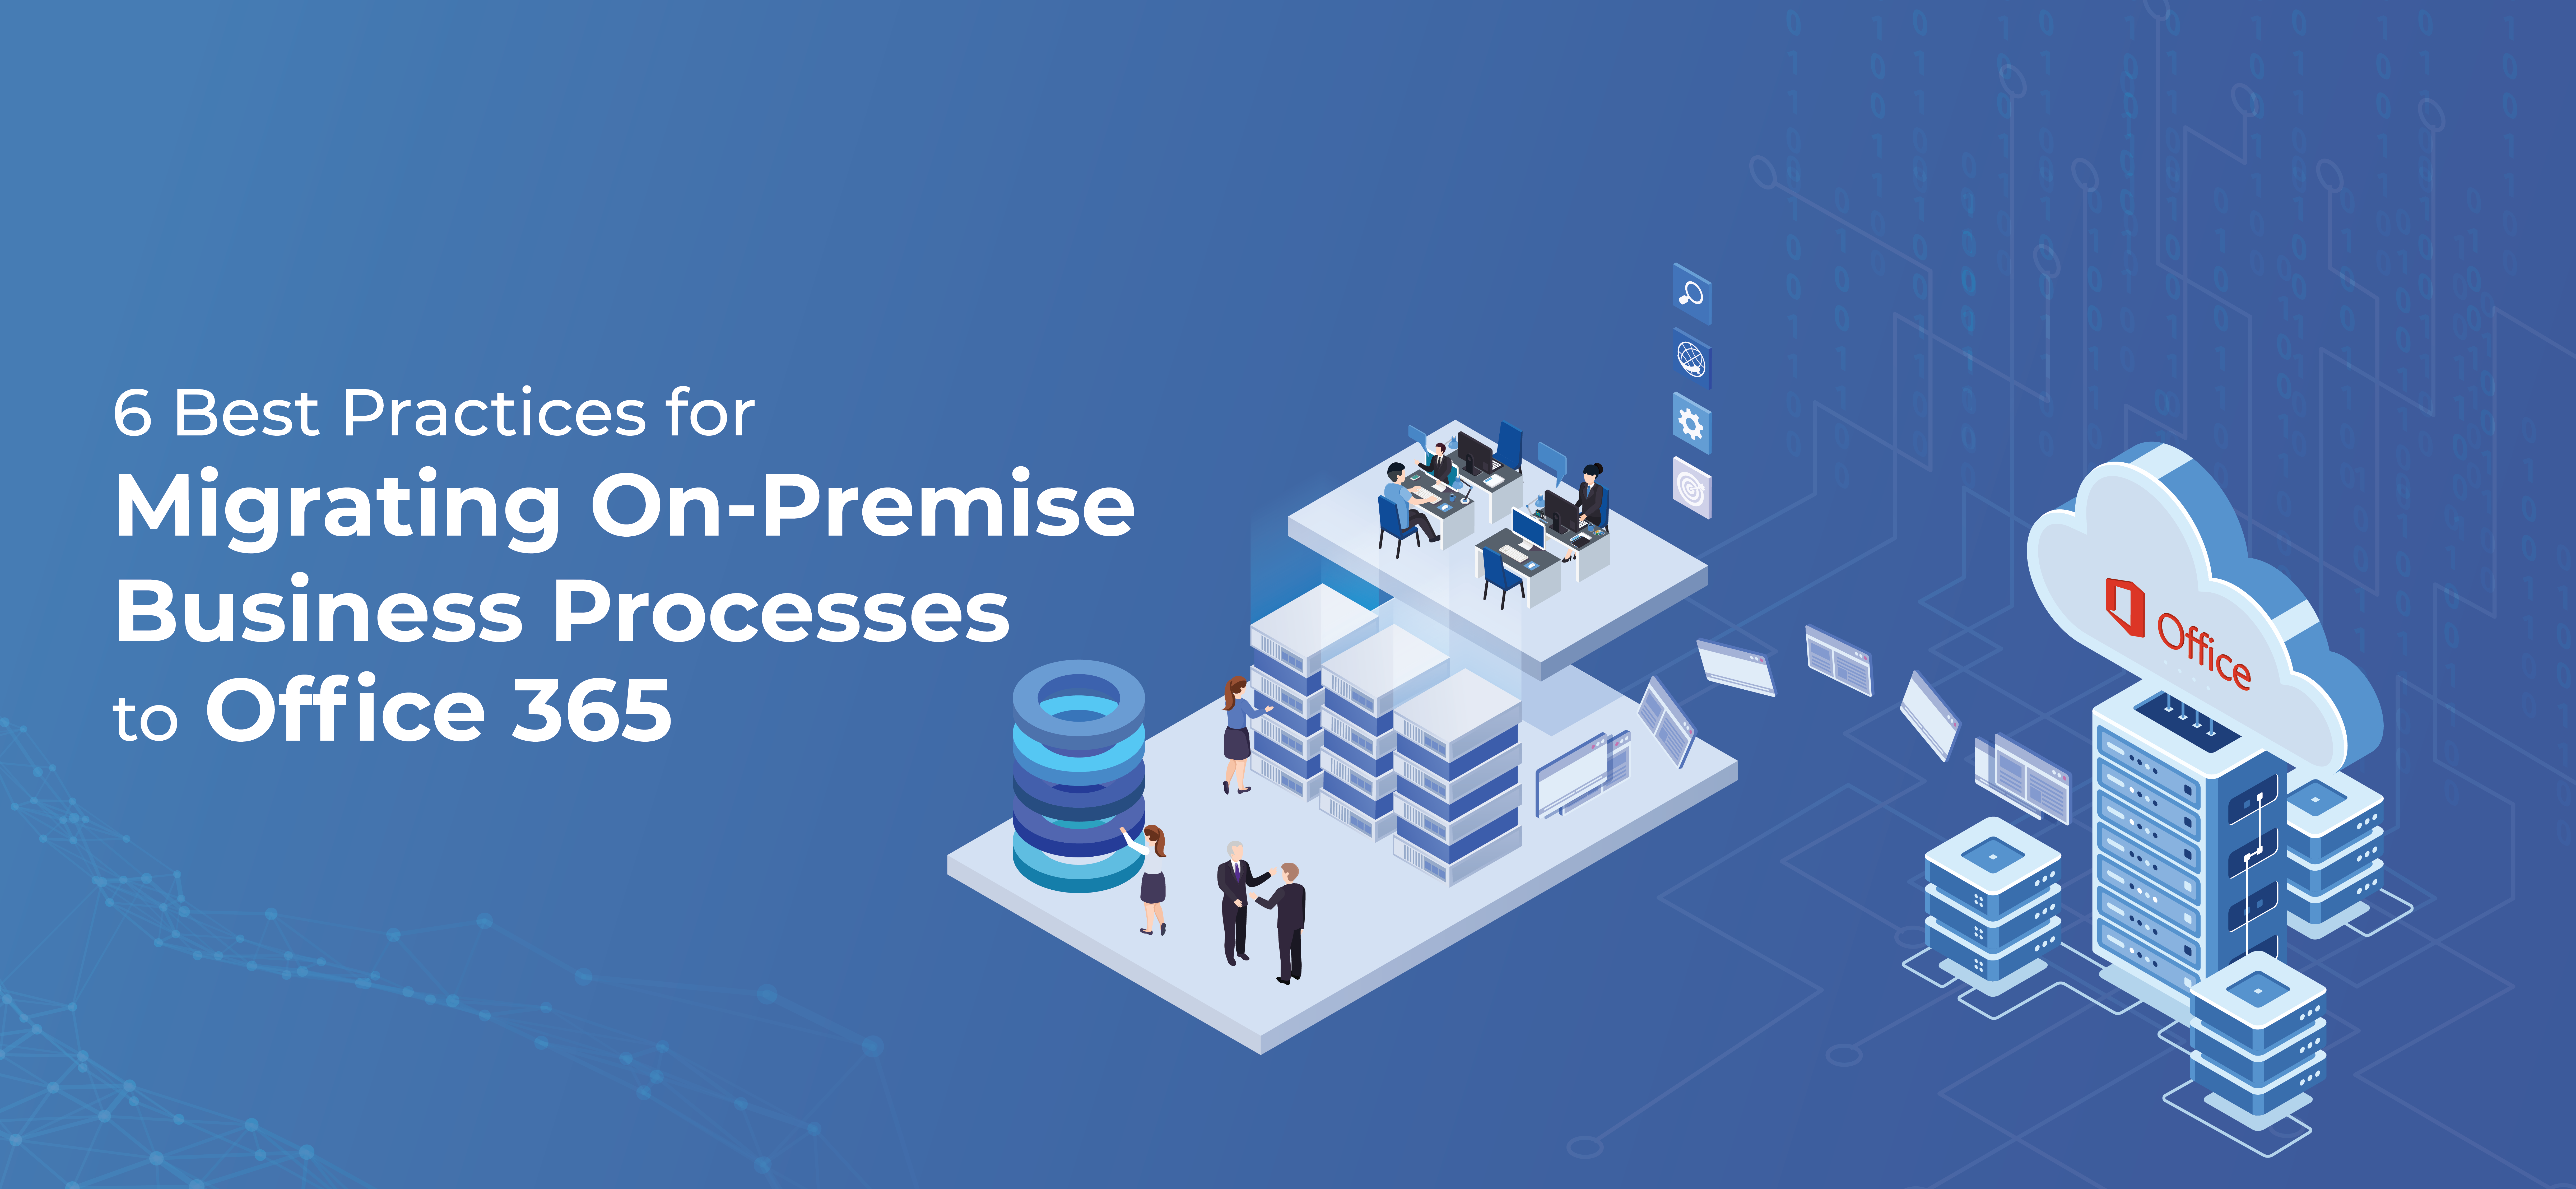 6 Best Practices for migrating On-Premises Business Processes to Office 365